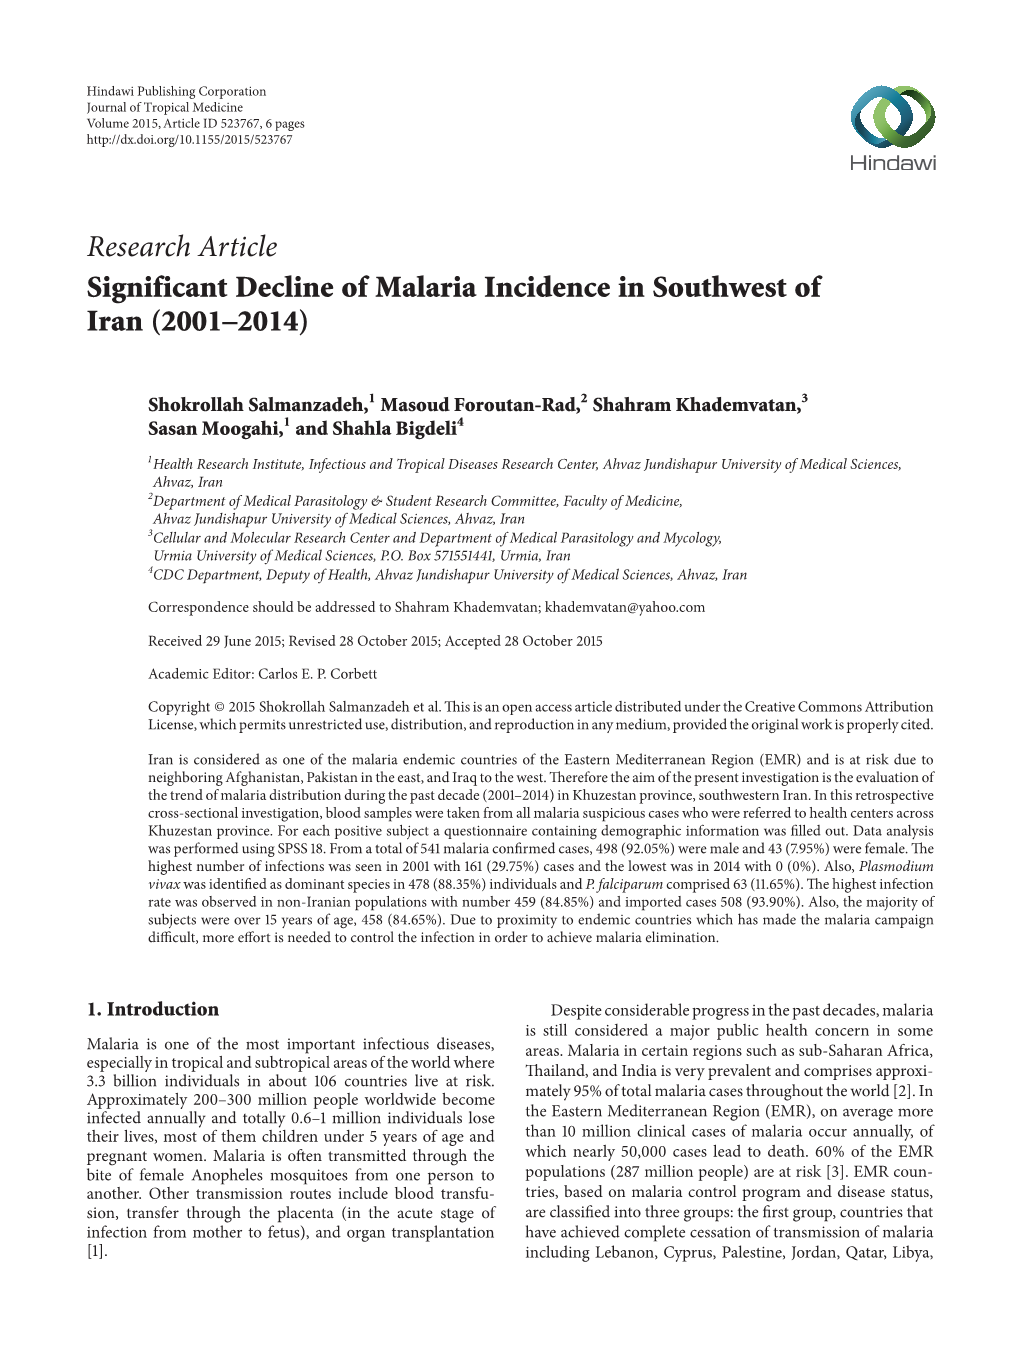 Significant Decline of Malaria Incidence in Southwest of Iran (2001–2014)